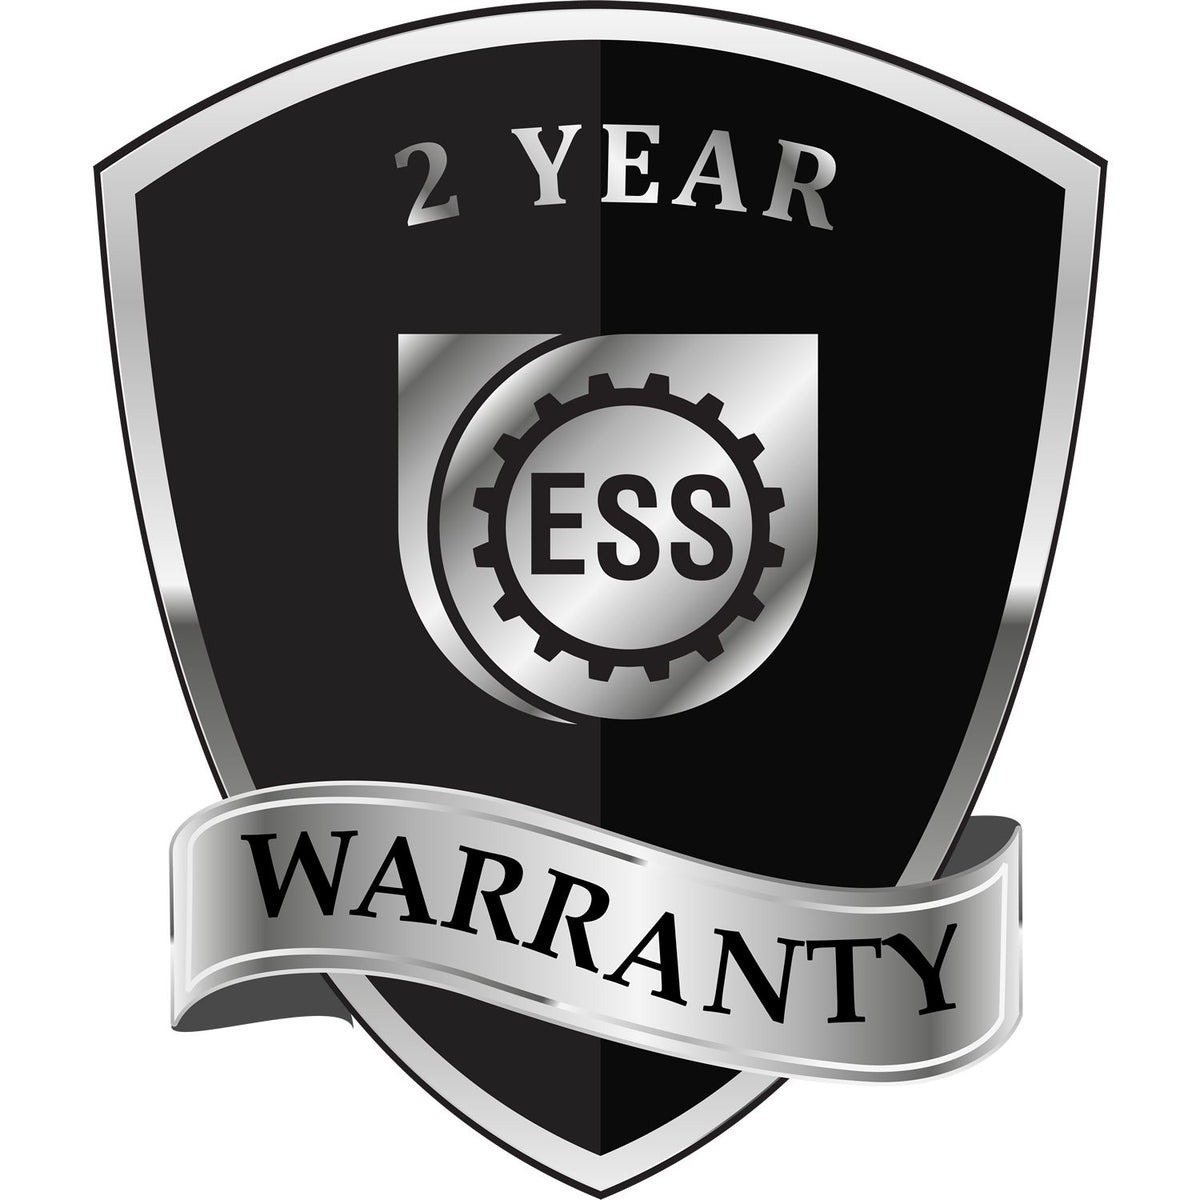 A badge or emblem showing a warranty icon for the Soft Minnesota Professional Engineer Seal